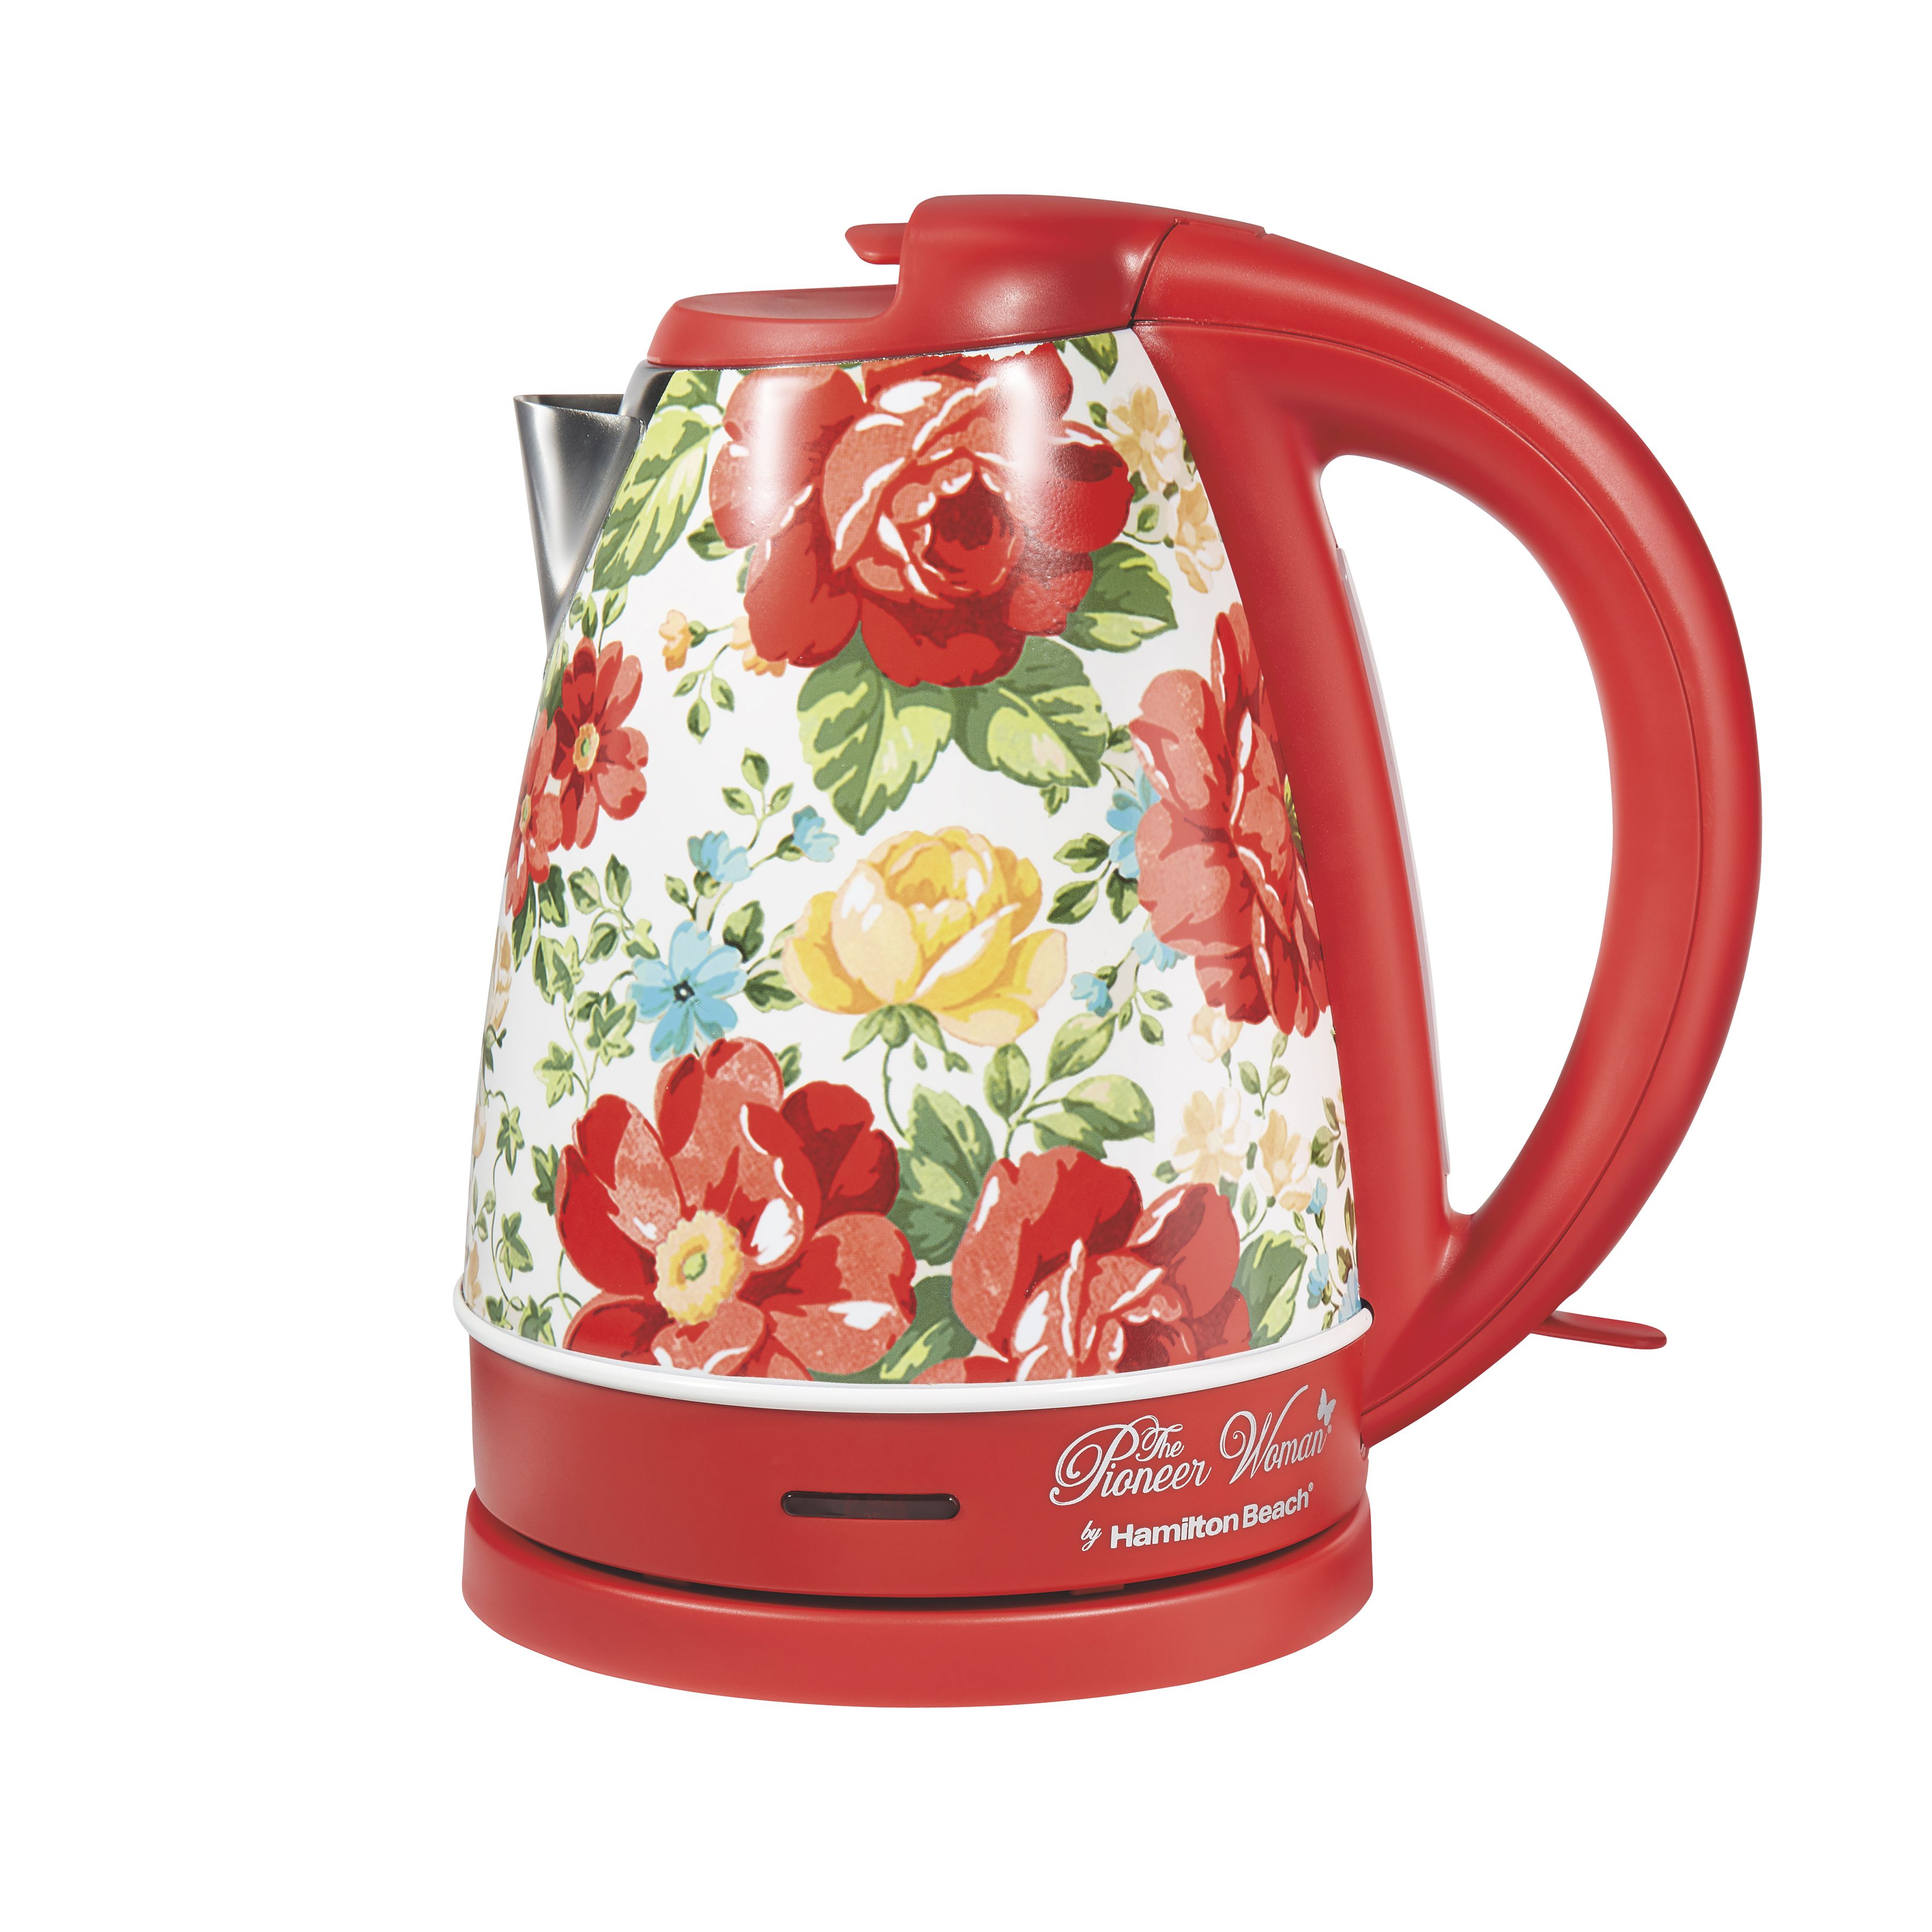 The Pioneer Woman Vintage Floral Electric Kettle